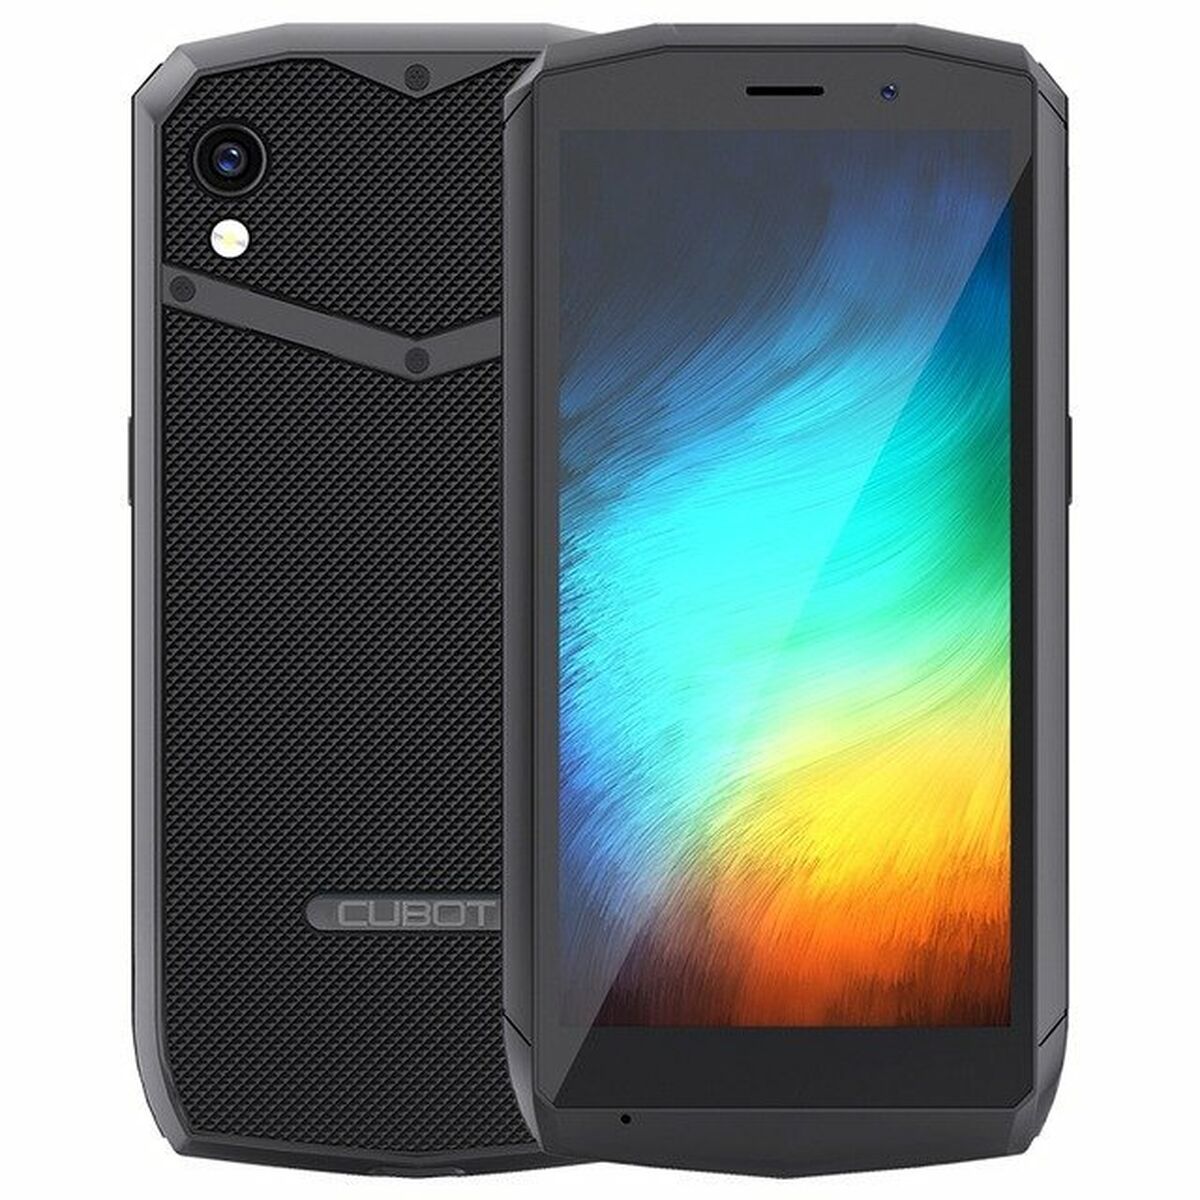 Smartphone Cubot Pocket Black 4" Quad Core, Cubot, Electronics, Mobile phones, smartphone-cubot-pocket-black-4-quad-core, Brand_Cubot, category-reference-2609, category-reference-2617, category-reference-2618, category-reference-t-19653, category-reference-t-19894, Condition_NEW, gadget, office, Price_100 - 200, telephones & tablets, Teleworking, wifi y bluetooth, RiotNook